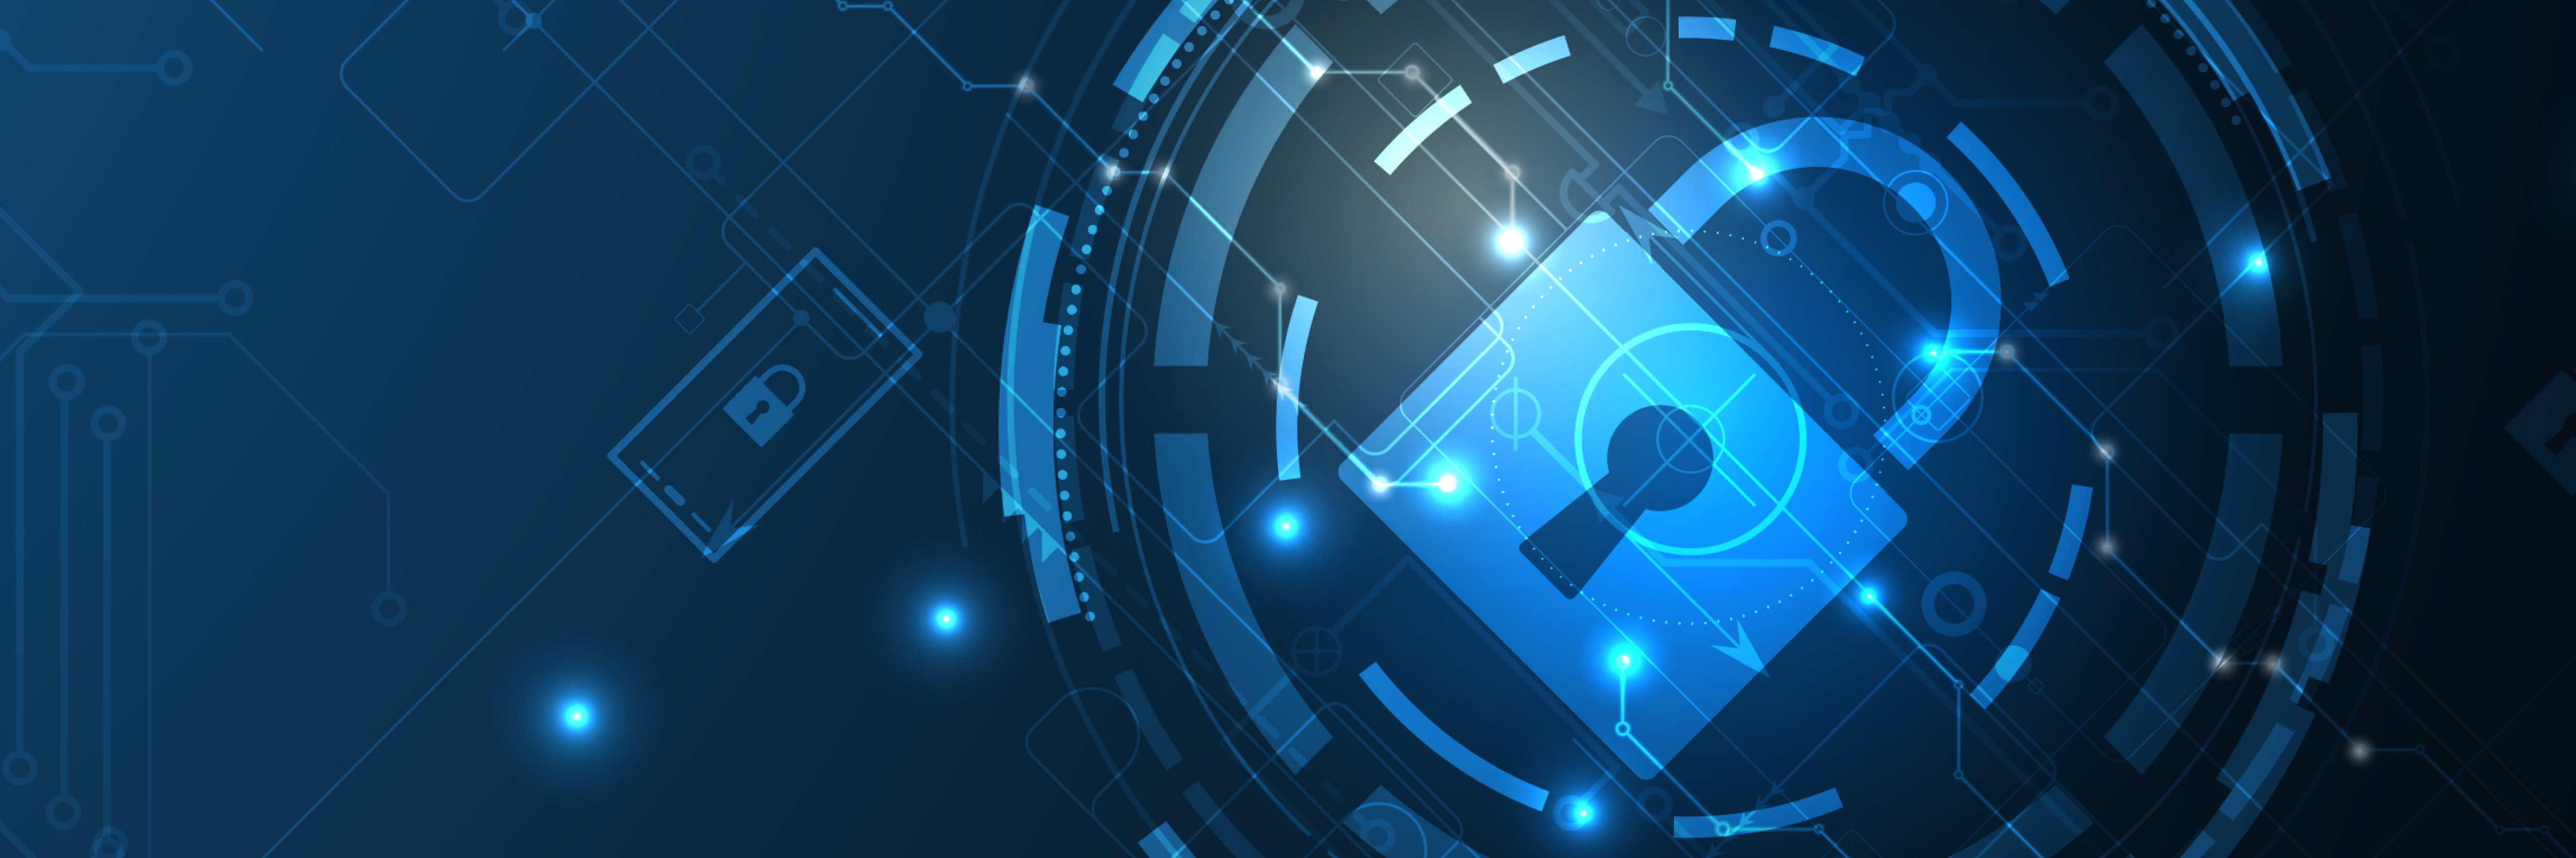 Digital illustration of cyber security lock inside circles and icon graphics.